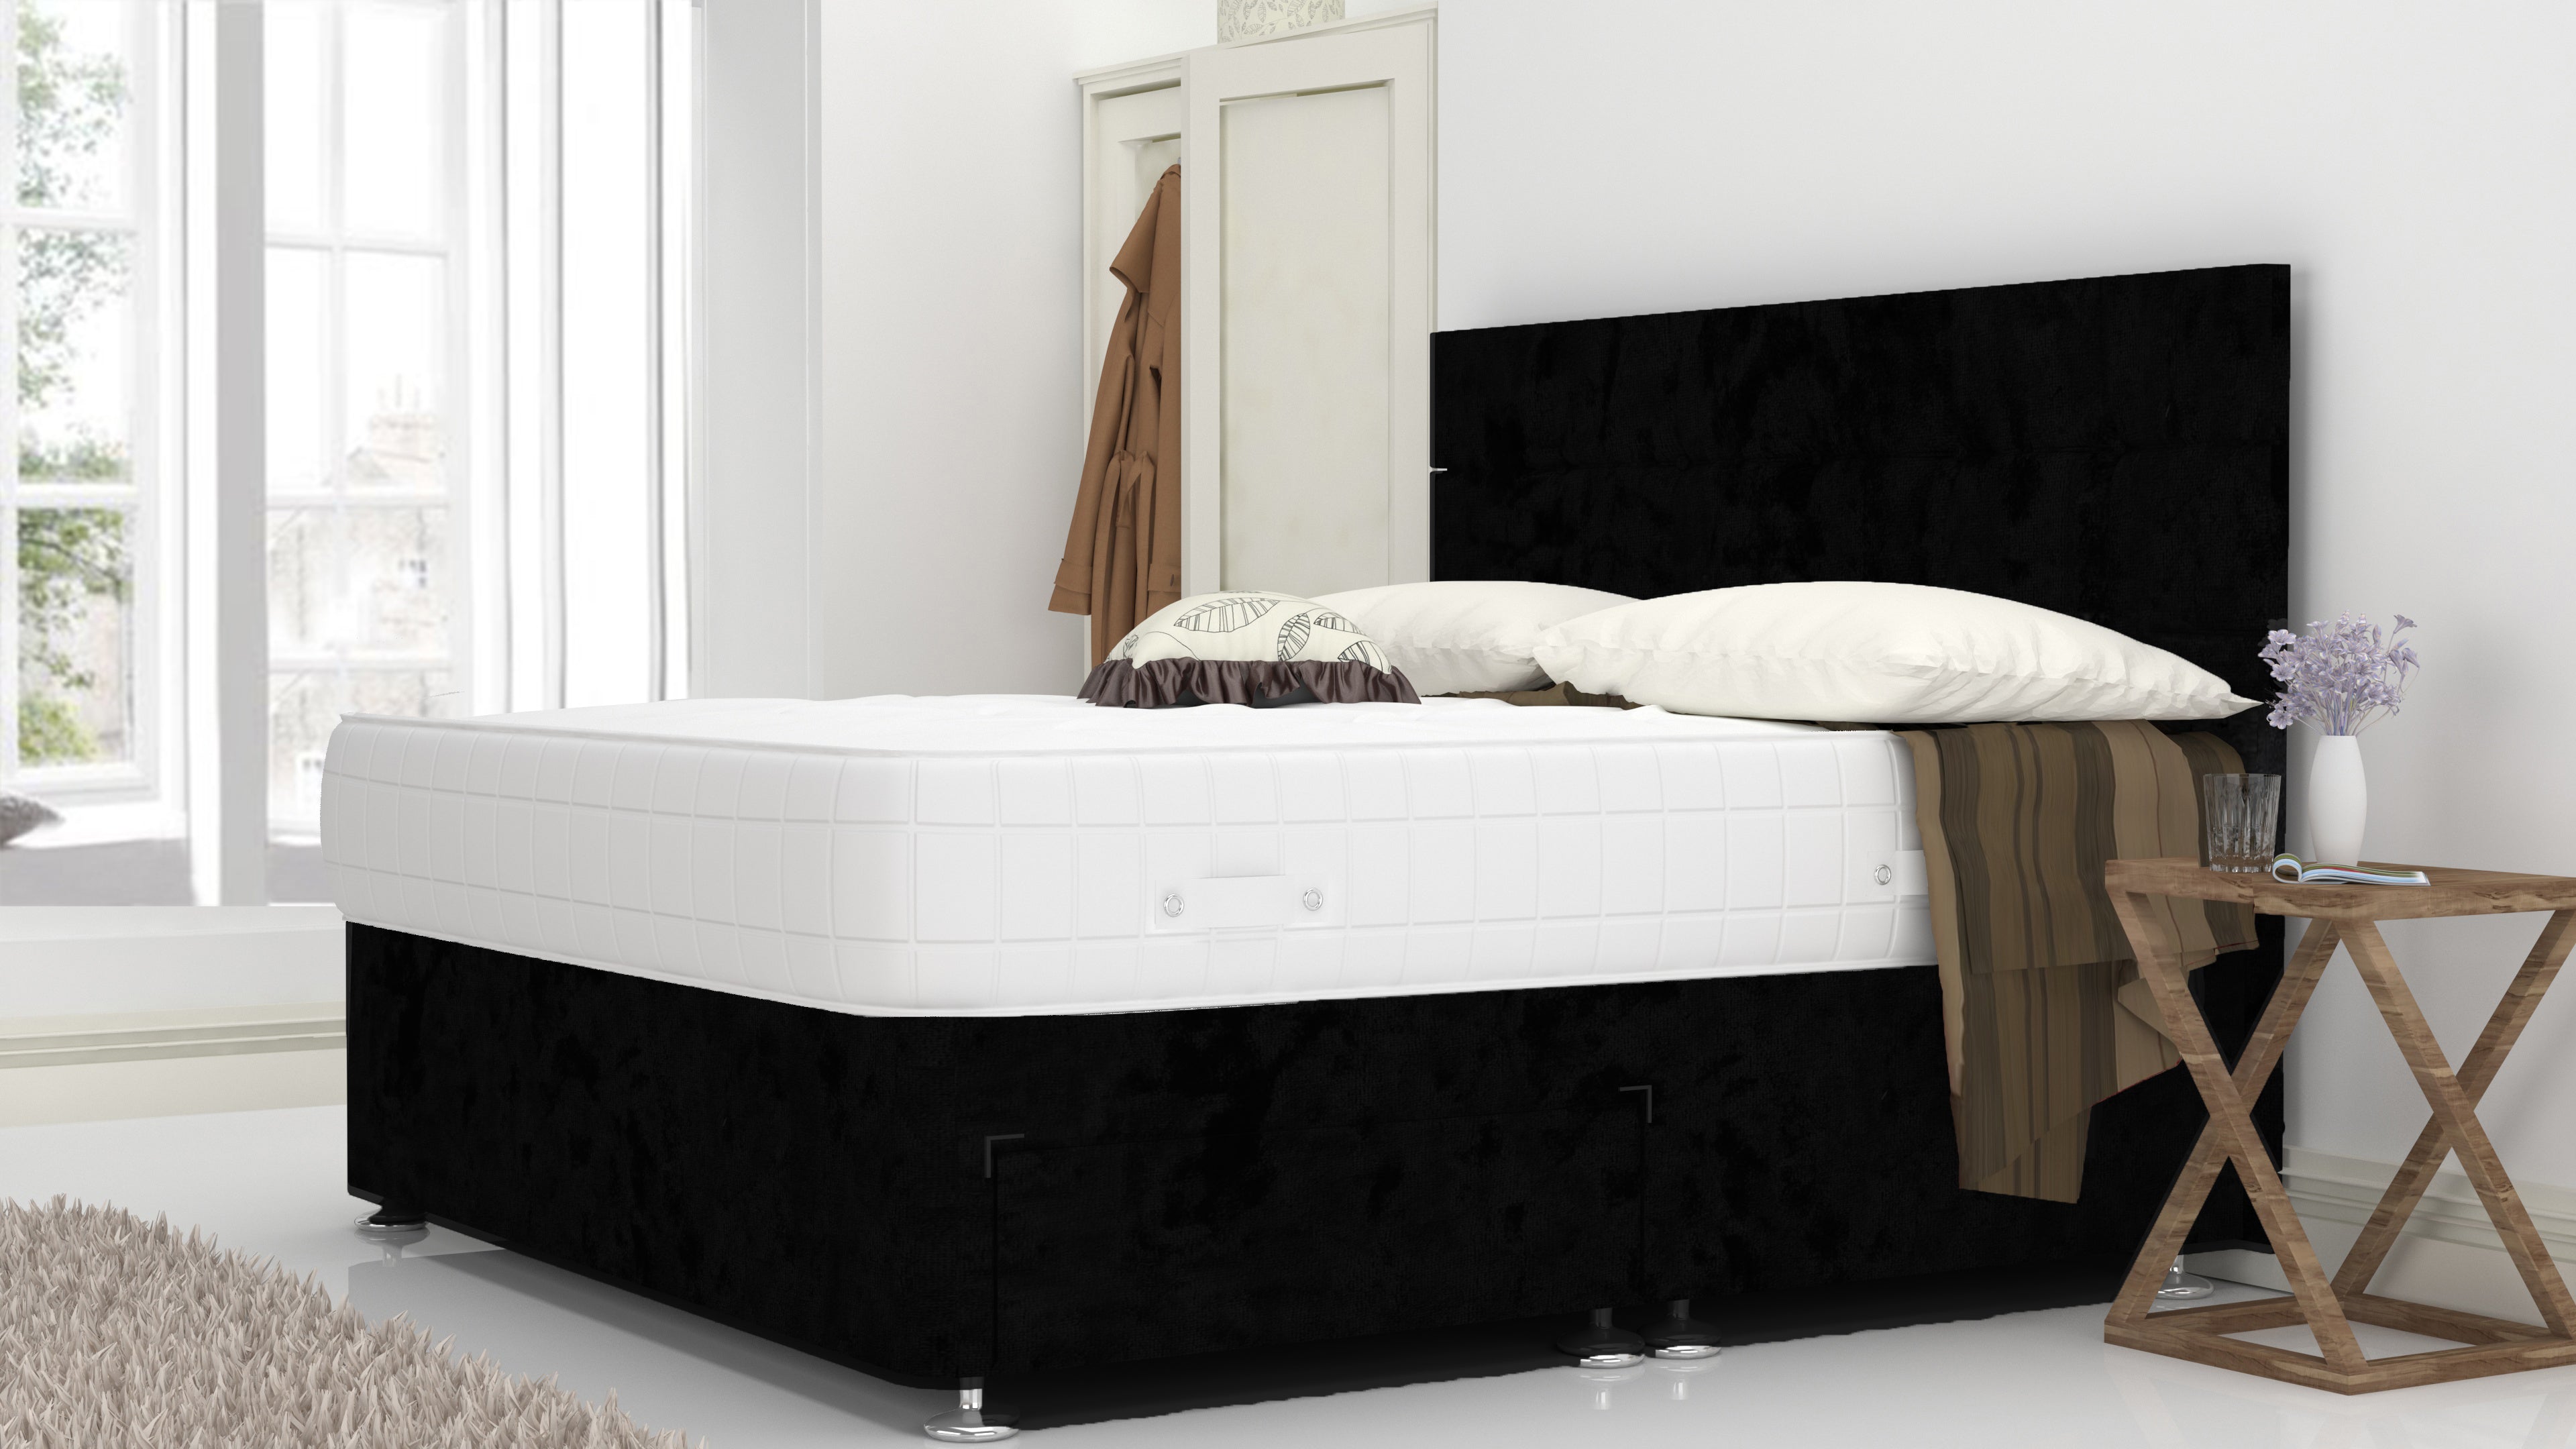 Black Crushed 5 Feet Divan Bed Set With Cube Headboard (Included Feet) And Free Orthopedic Mattress